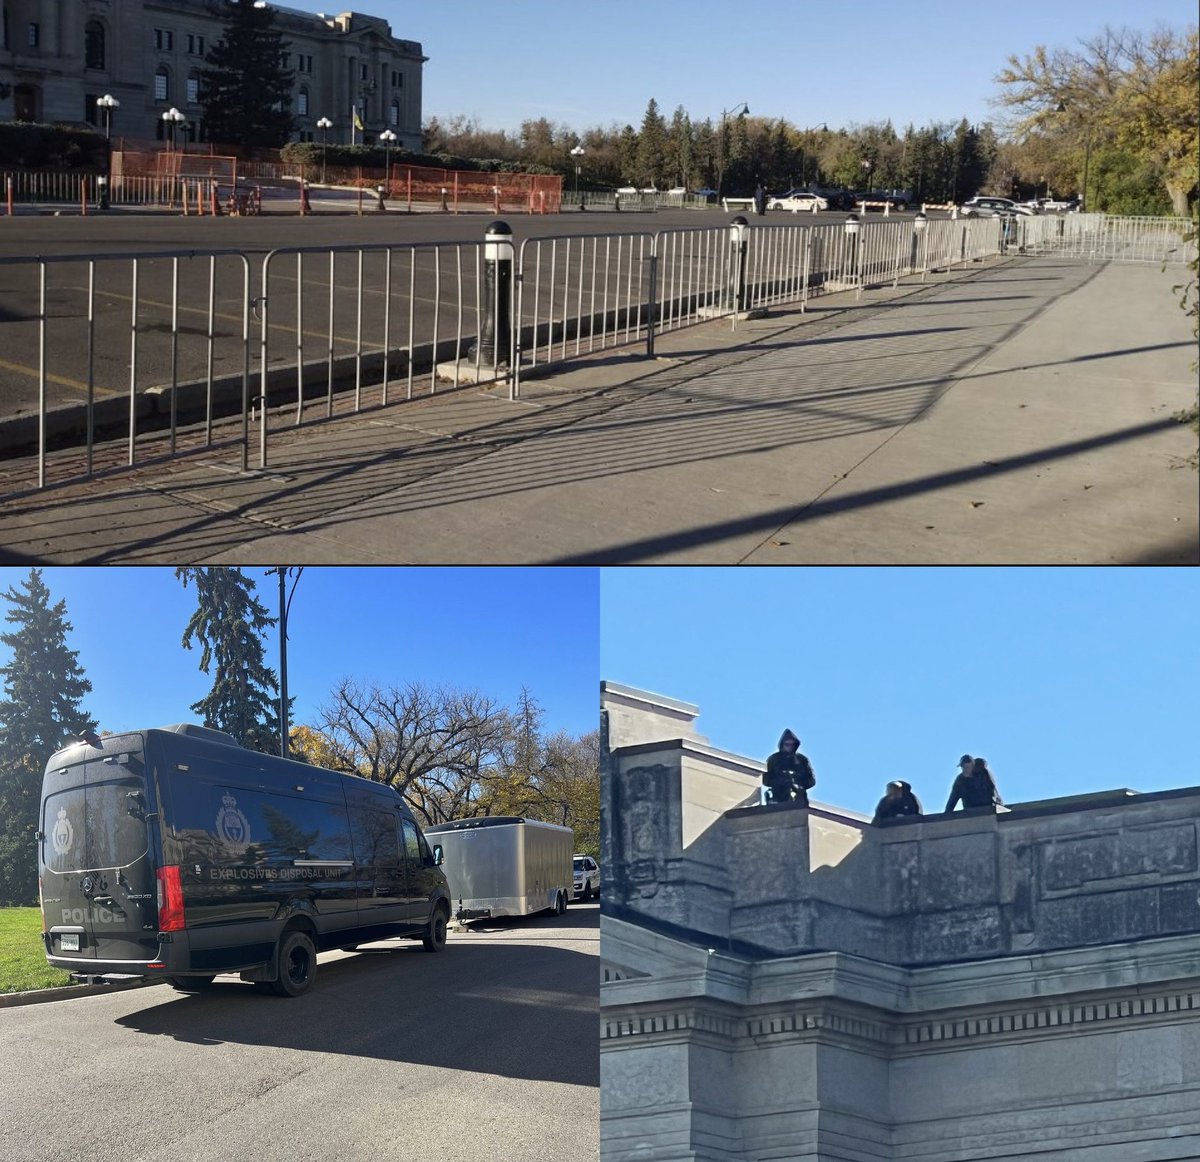 Welcome to Saskatchewan’s Legislature. The place where the Scott Moe Sask Party government keeps the trans kids and their allies at bay with barricades, bomb squads and snipers. Your group is next. #skpoli Scott Moe’s version of the Trudeau Emergencies Act.